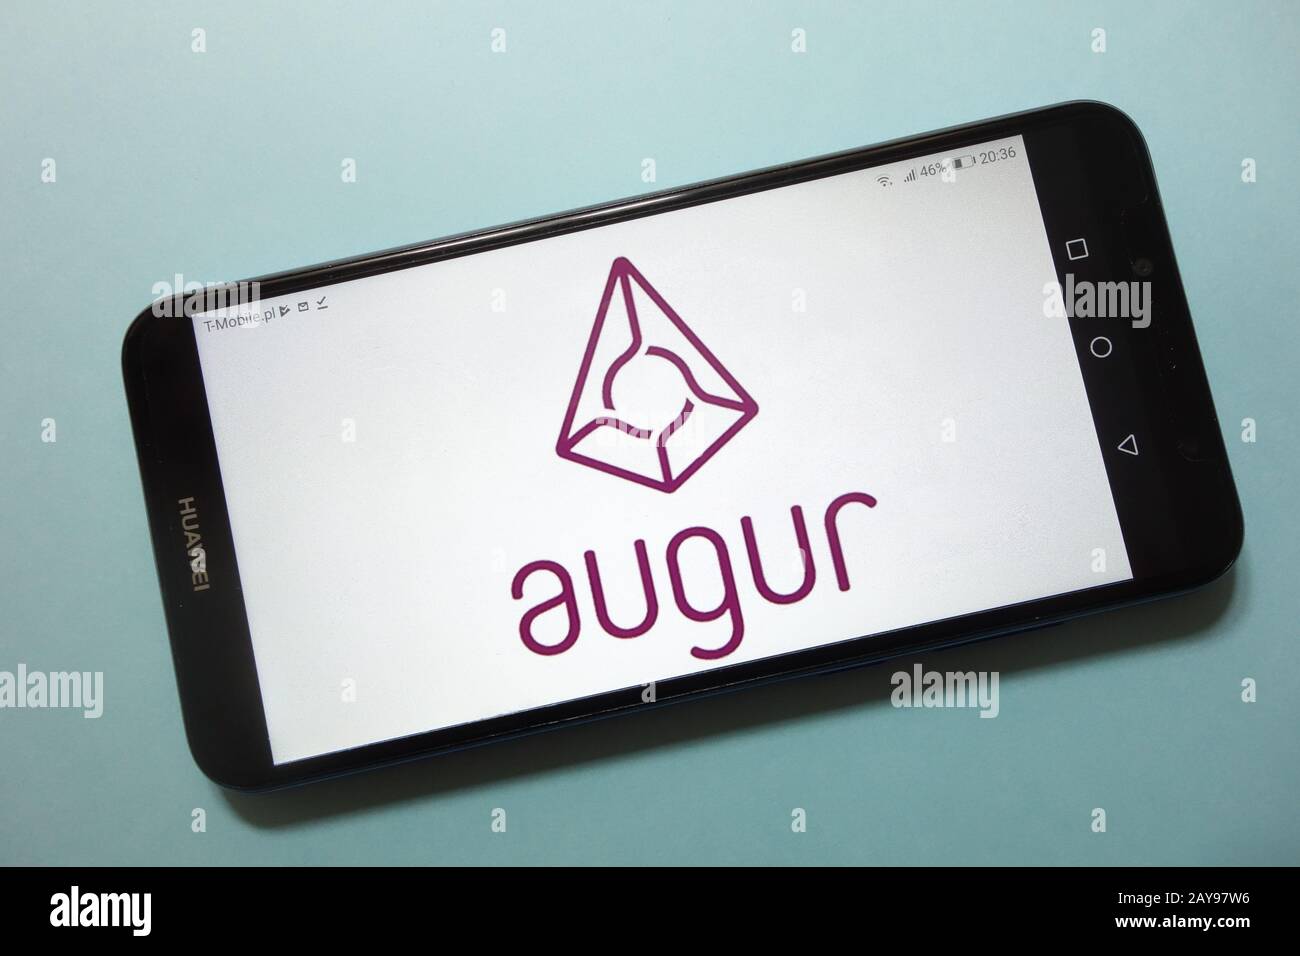 Augur (REP) cryptocurrency logo displayed on smartphone Stock Photo